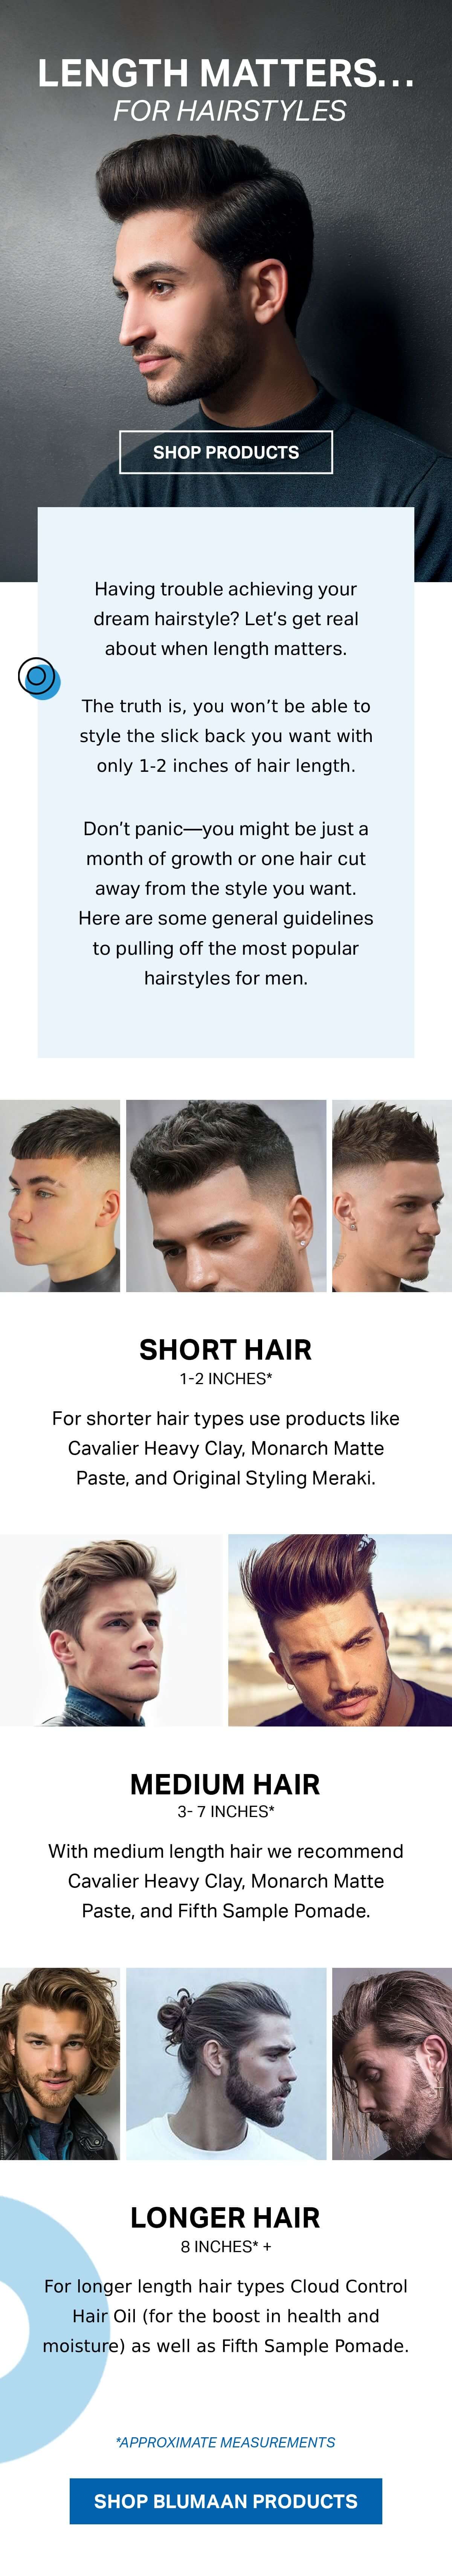 Medium-length wavy/curly (ish) hair dudes, what styling product do you use  to keep it in place, but allows for that wavey or straighter style? (photos  for my kinda hair inspo). : r/Pomade